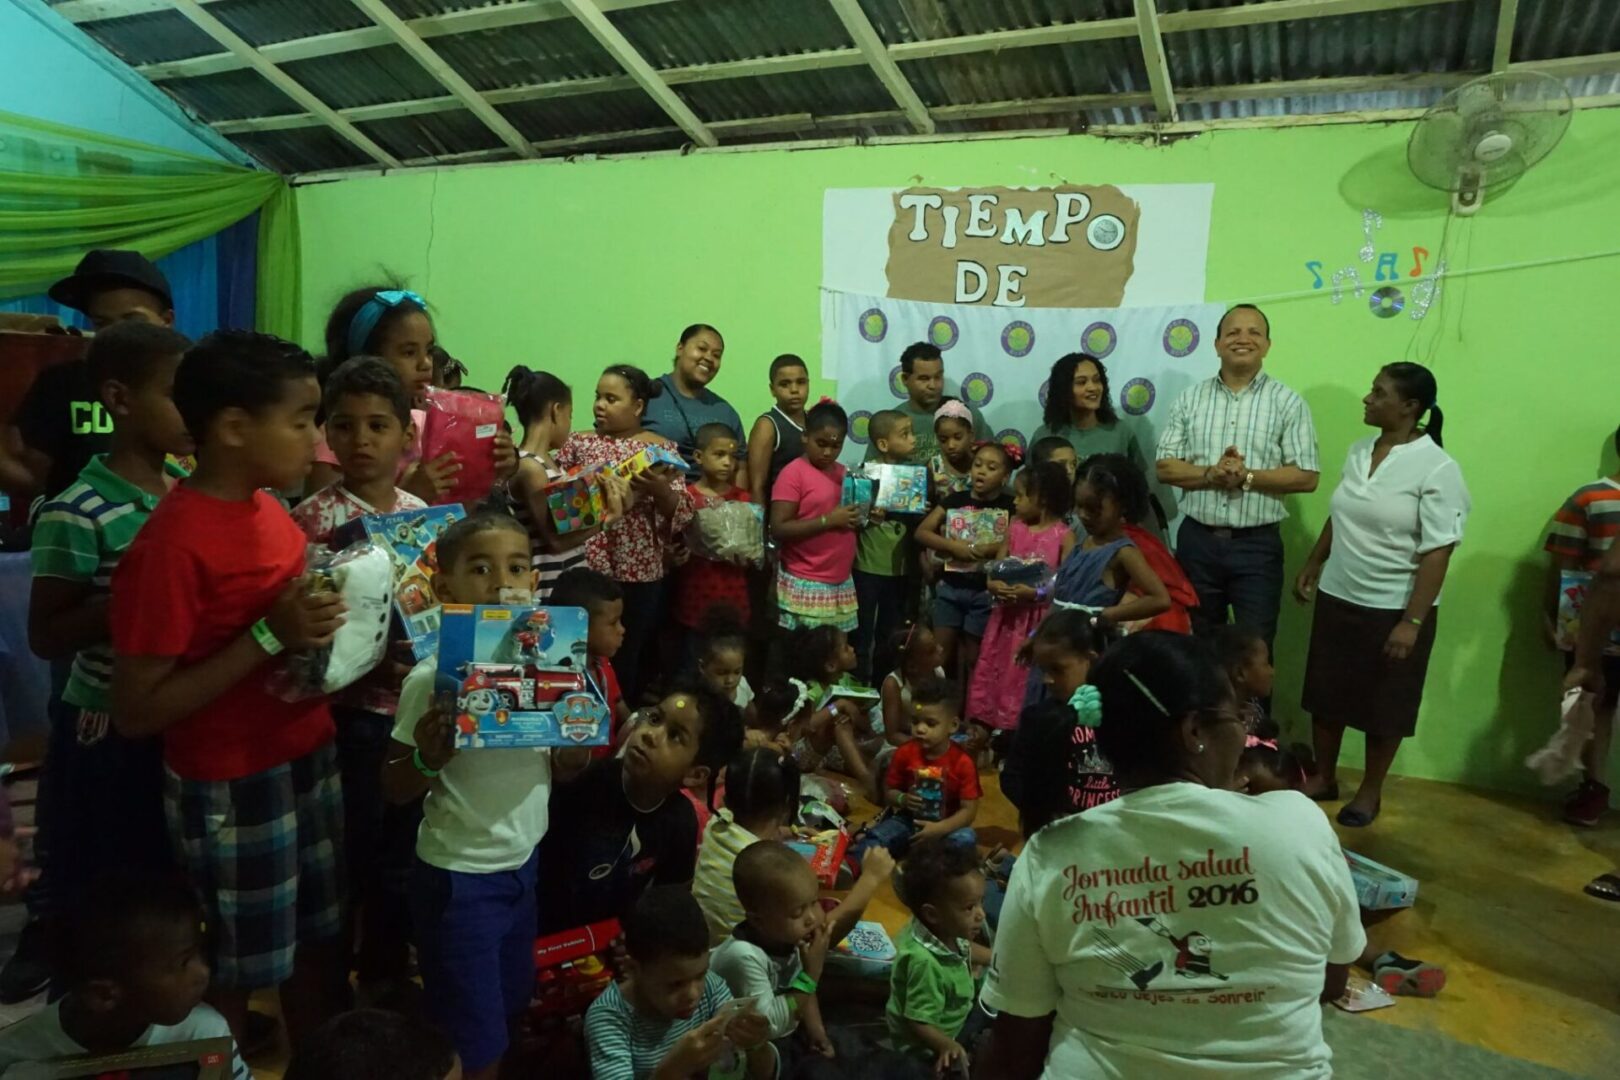 All of the children and the staff gathers in front of the room with their toy, with some of the children on the floor